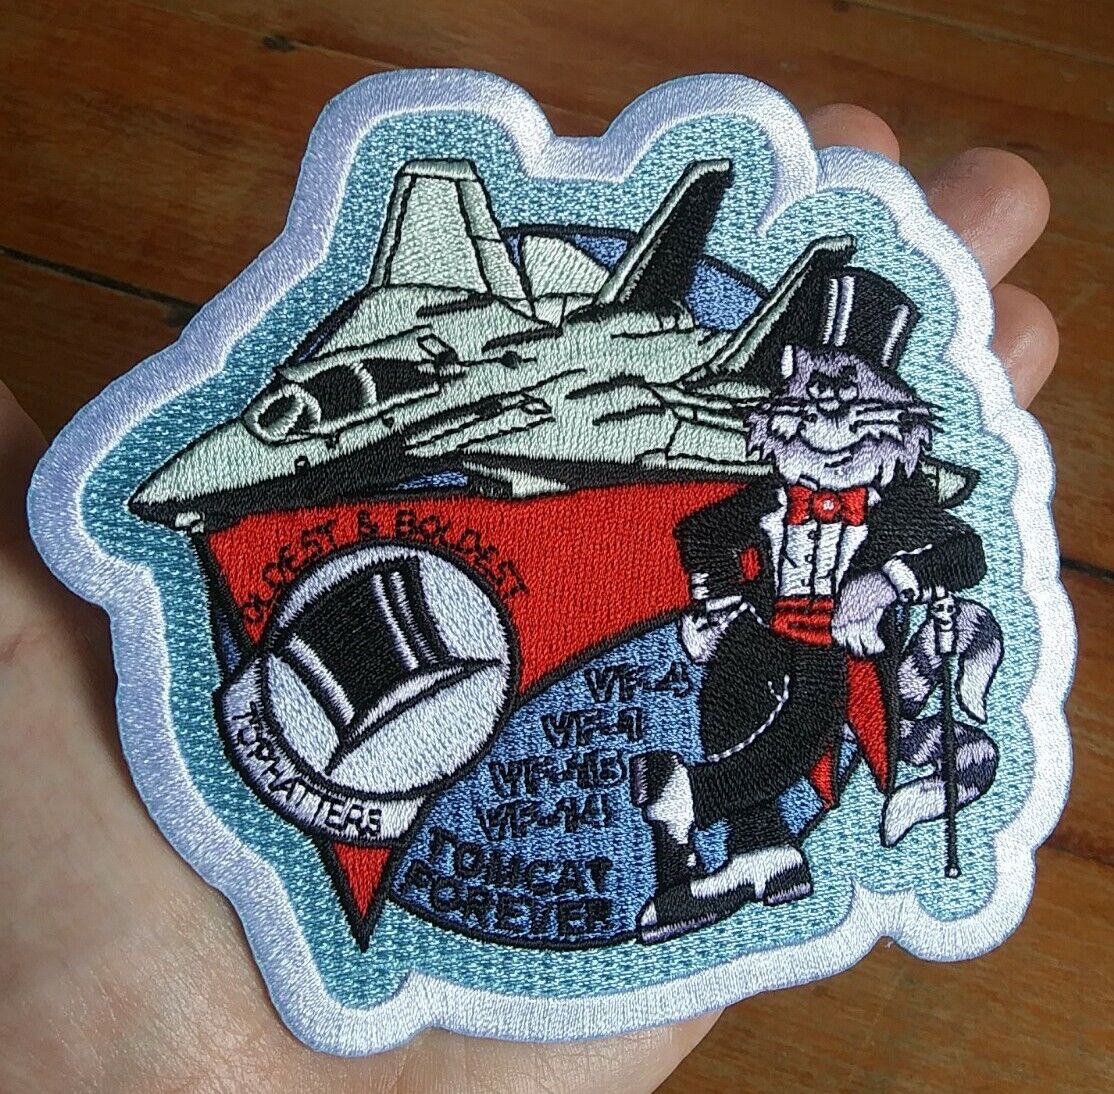 VF 14 TOMCAT FOREVER Oldest & Boldest ~ TOPHATTERS ~ US Navy MILITARY Patch